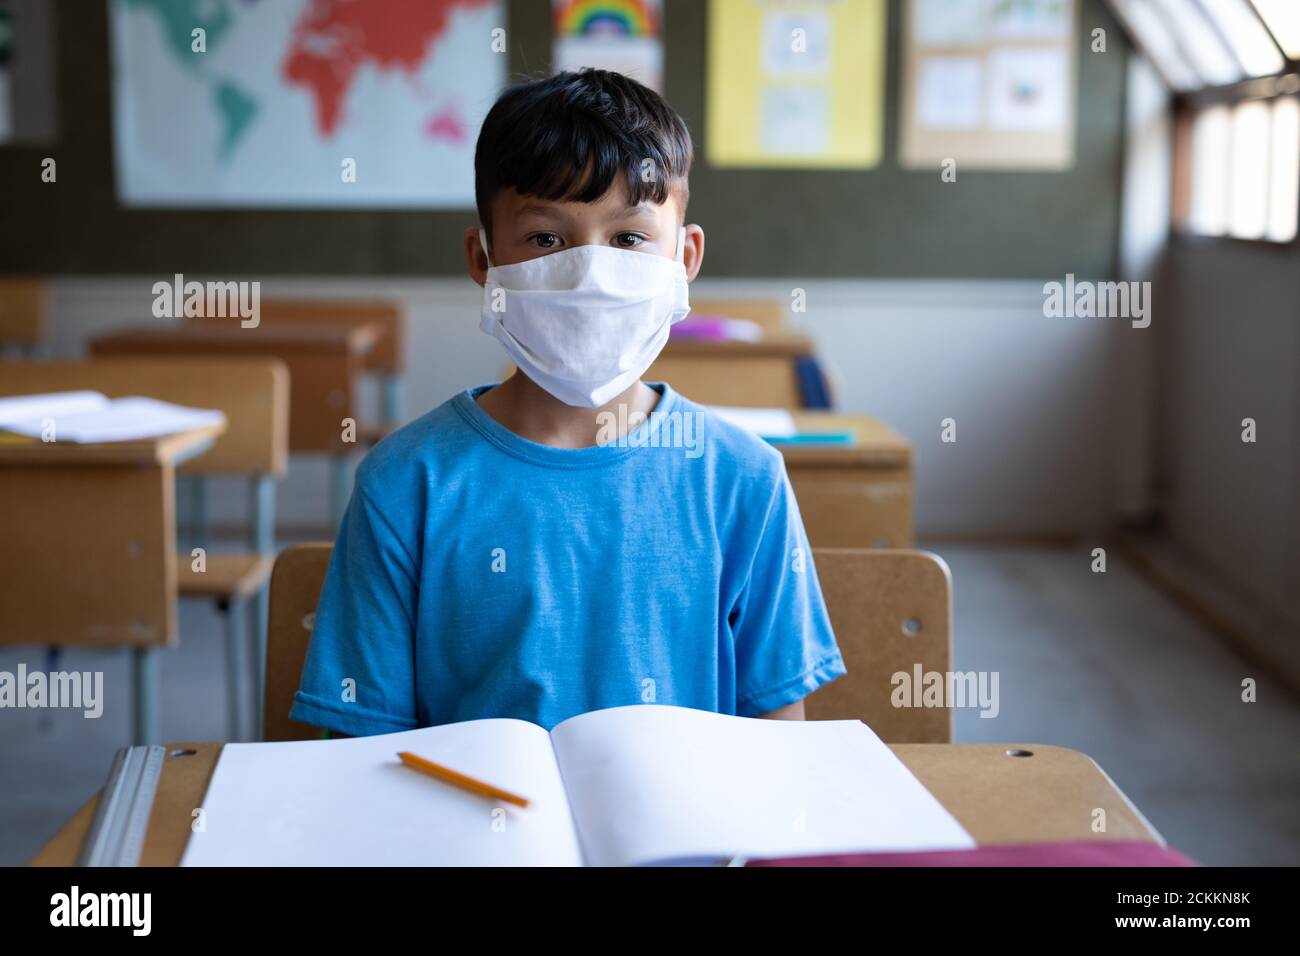 Boy wearing face mask sitting on his desk at school Stock Photo